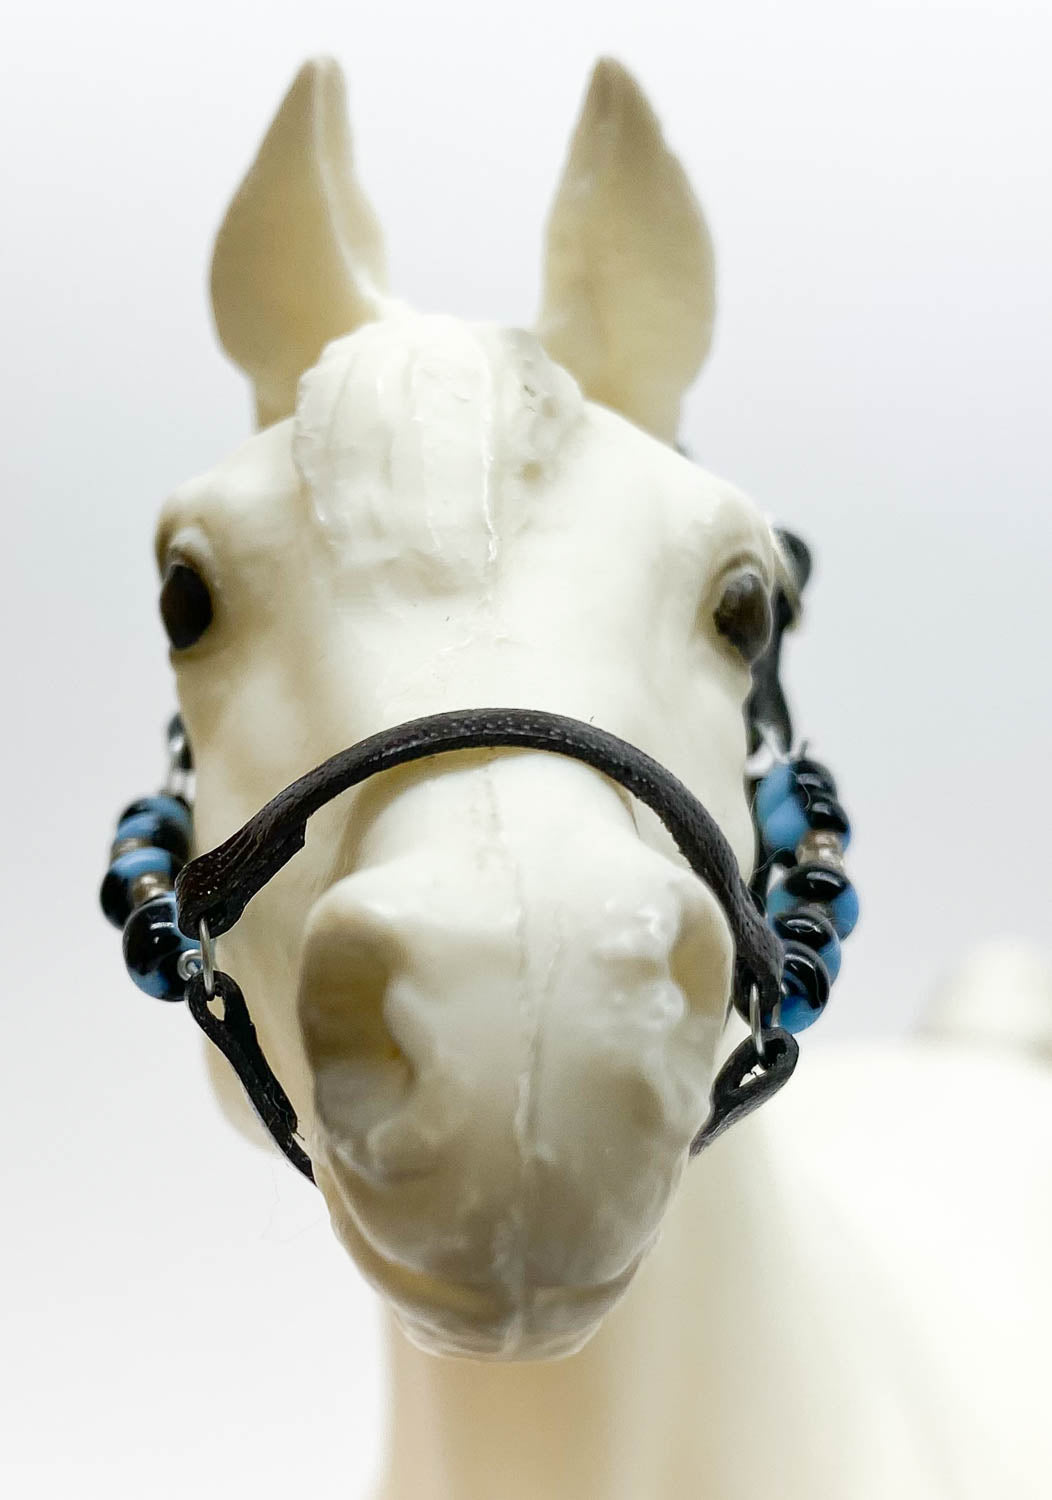 Halter, Black Leather with Bead Accents (Black, Blue & Crystal Clear)